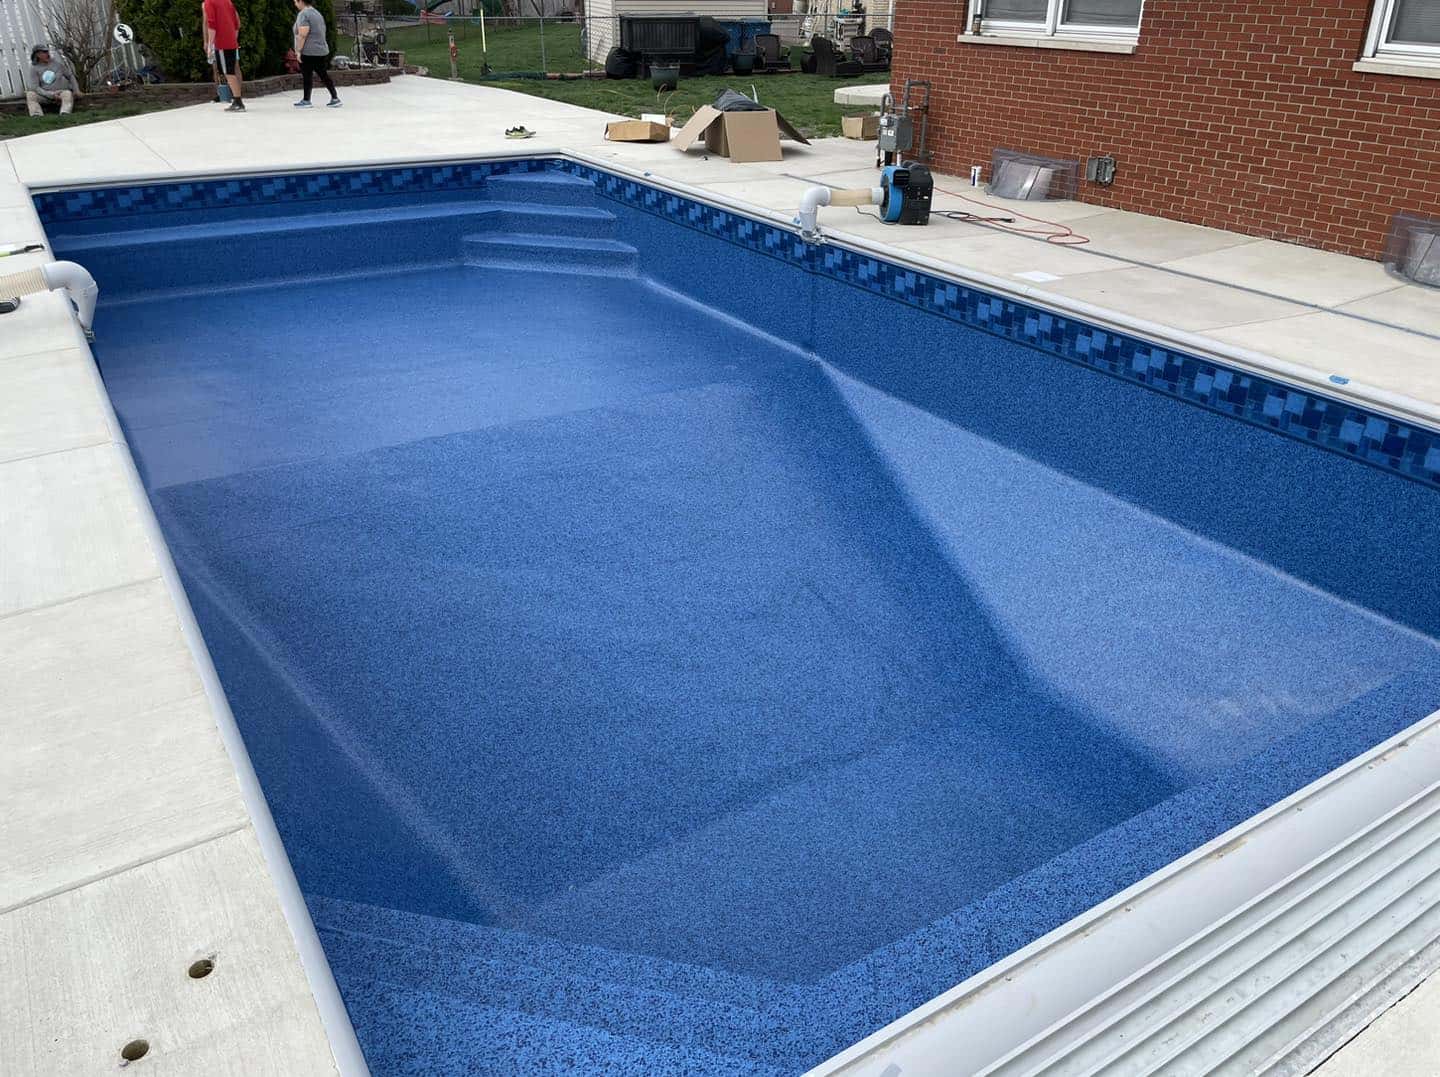 A blue swimming pool is being installed in a backyard.